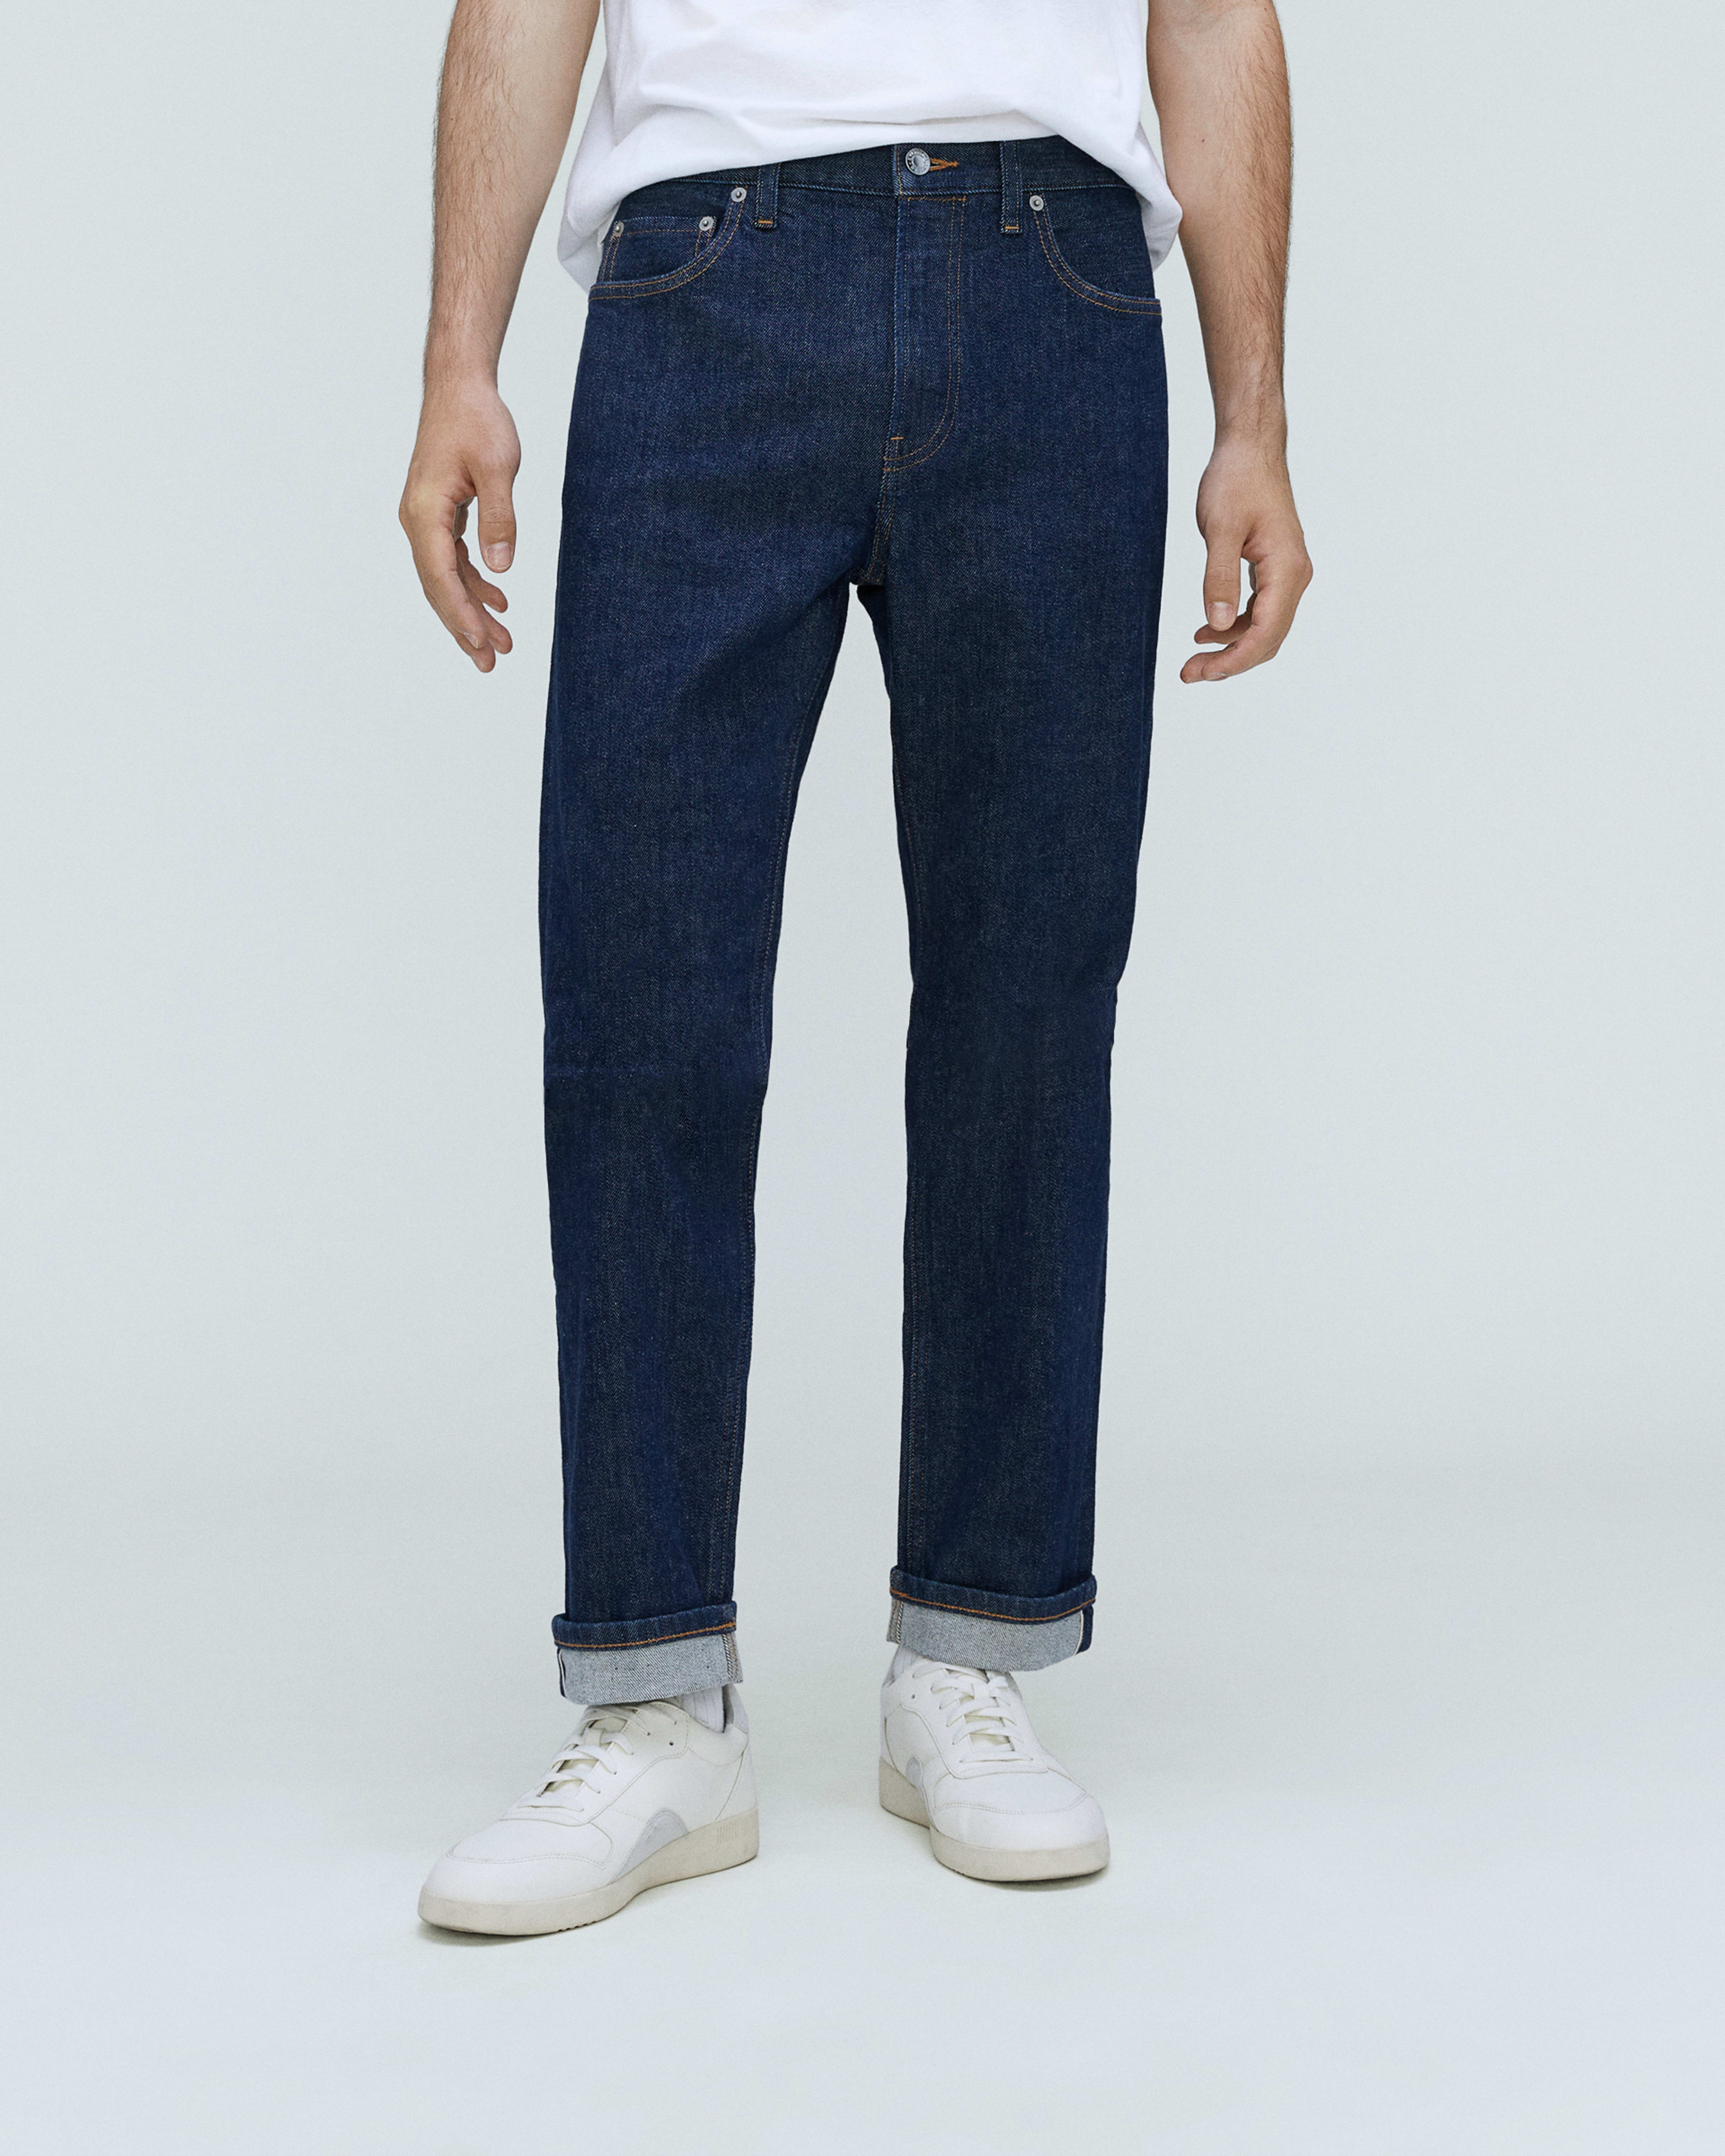 New Dawn - Straight Fit Selvedge Jeans for Men